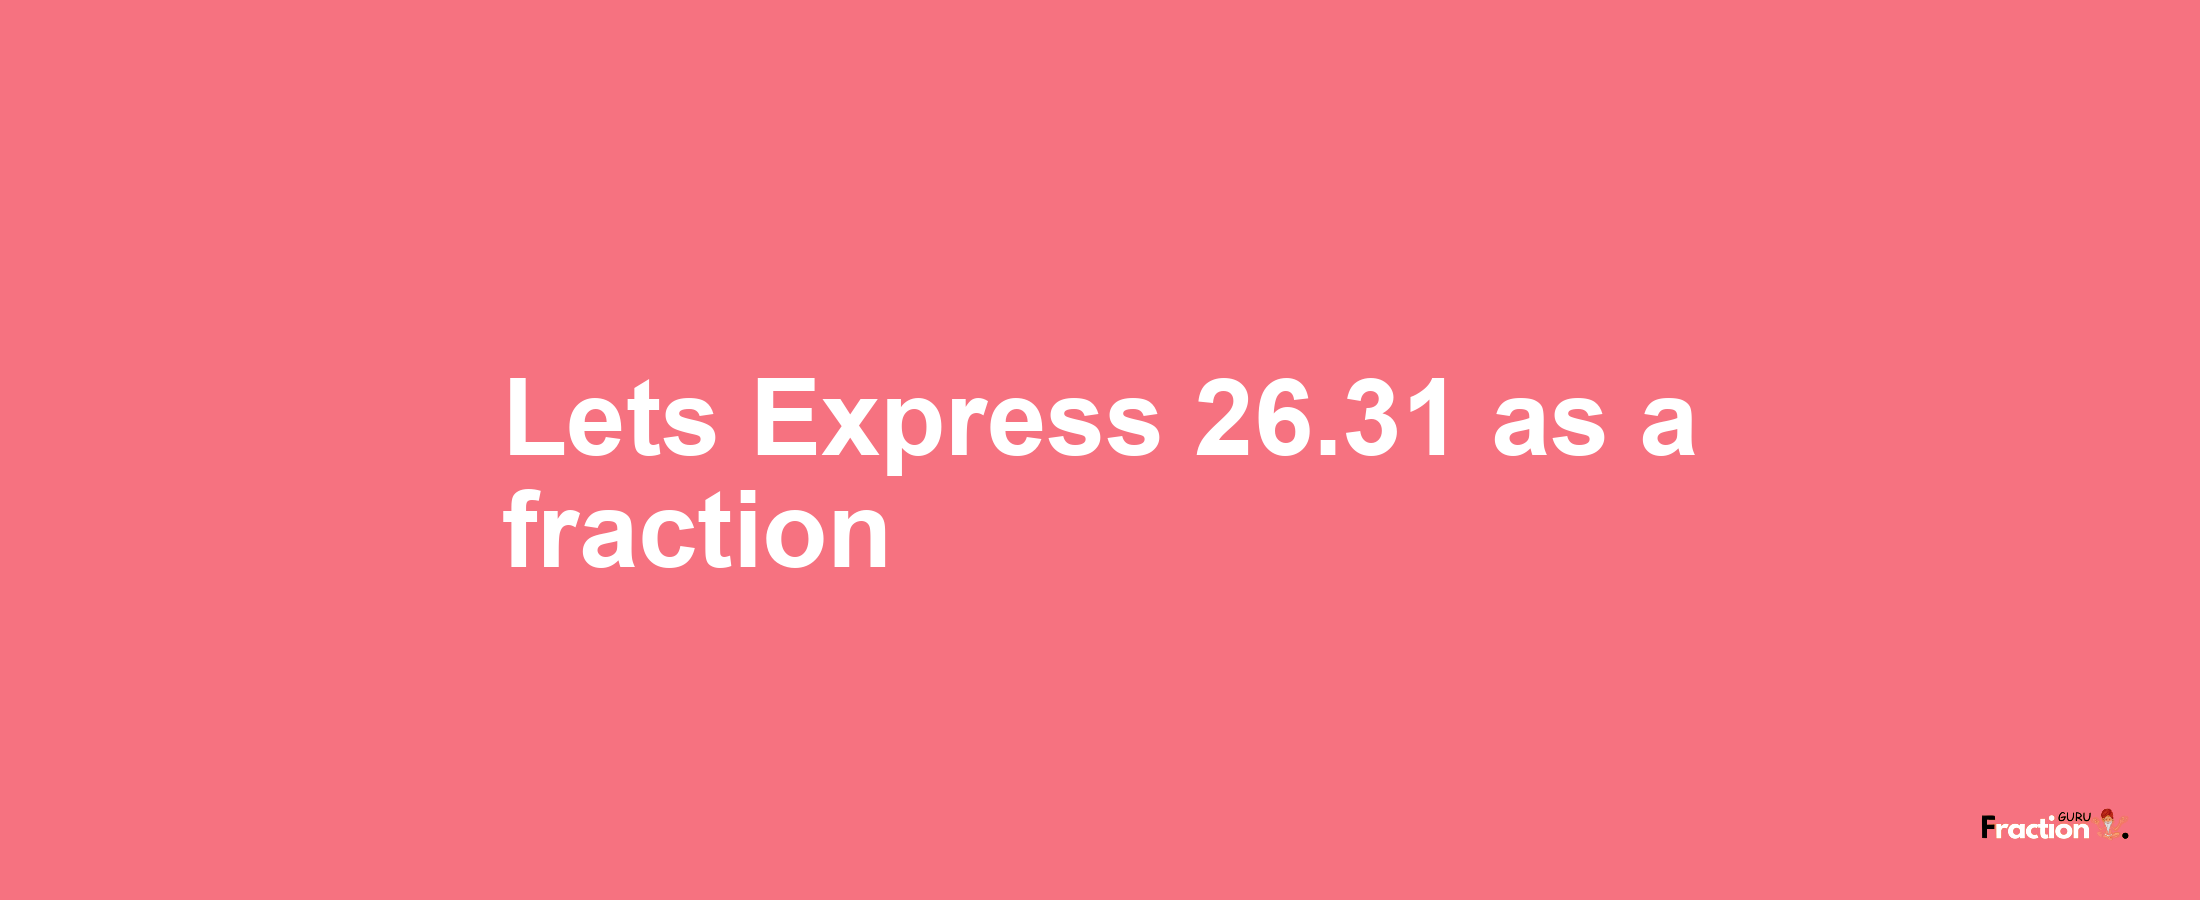 Lets Express 26.31 as afraction